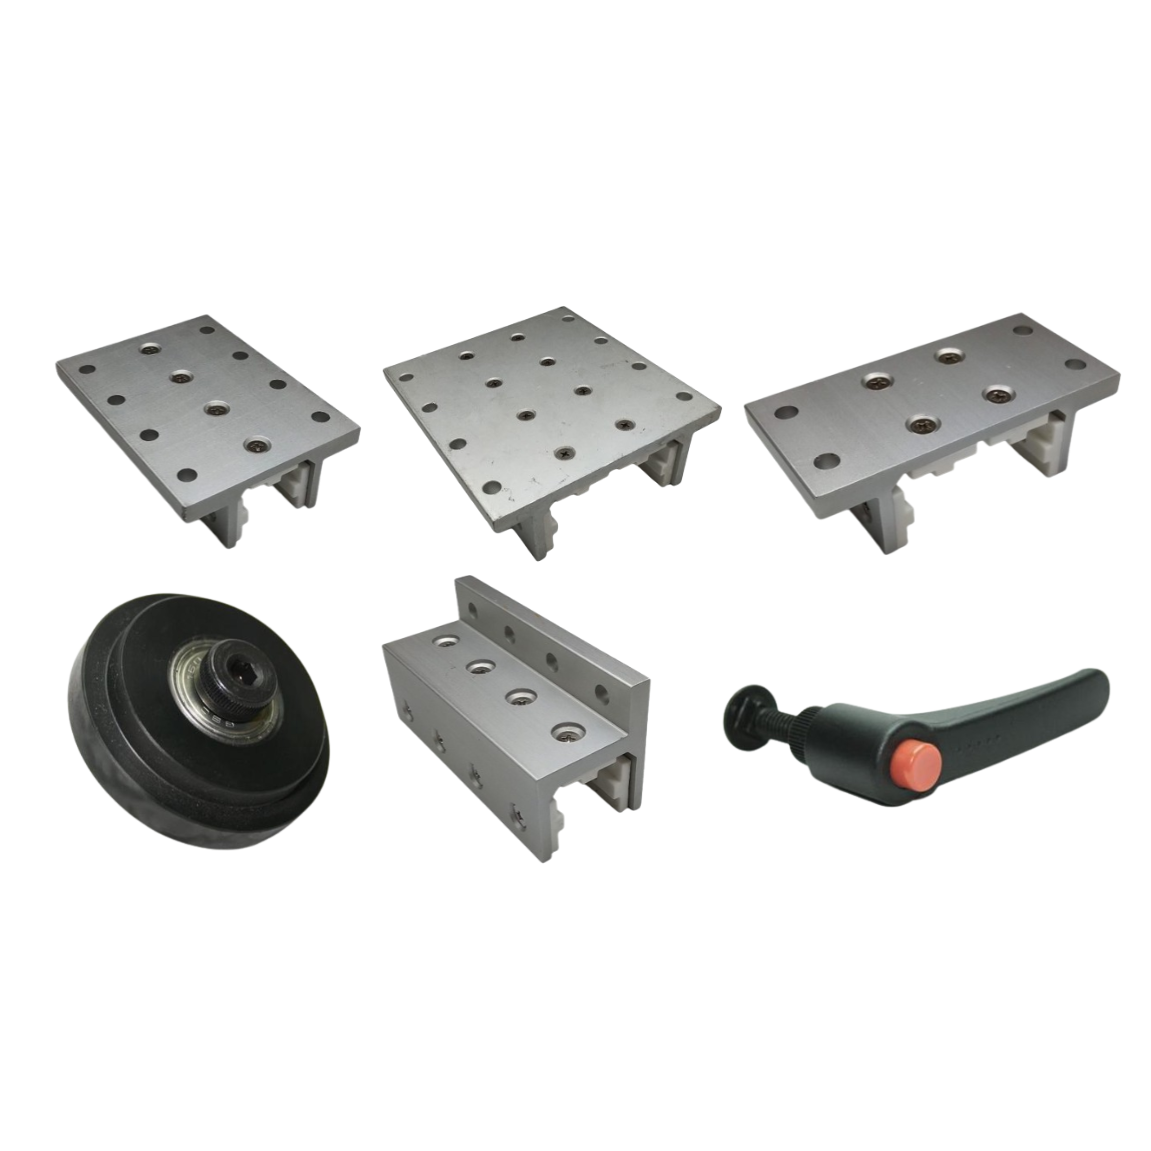 10 Series Linear Motion